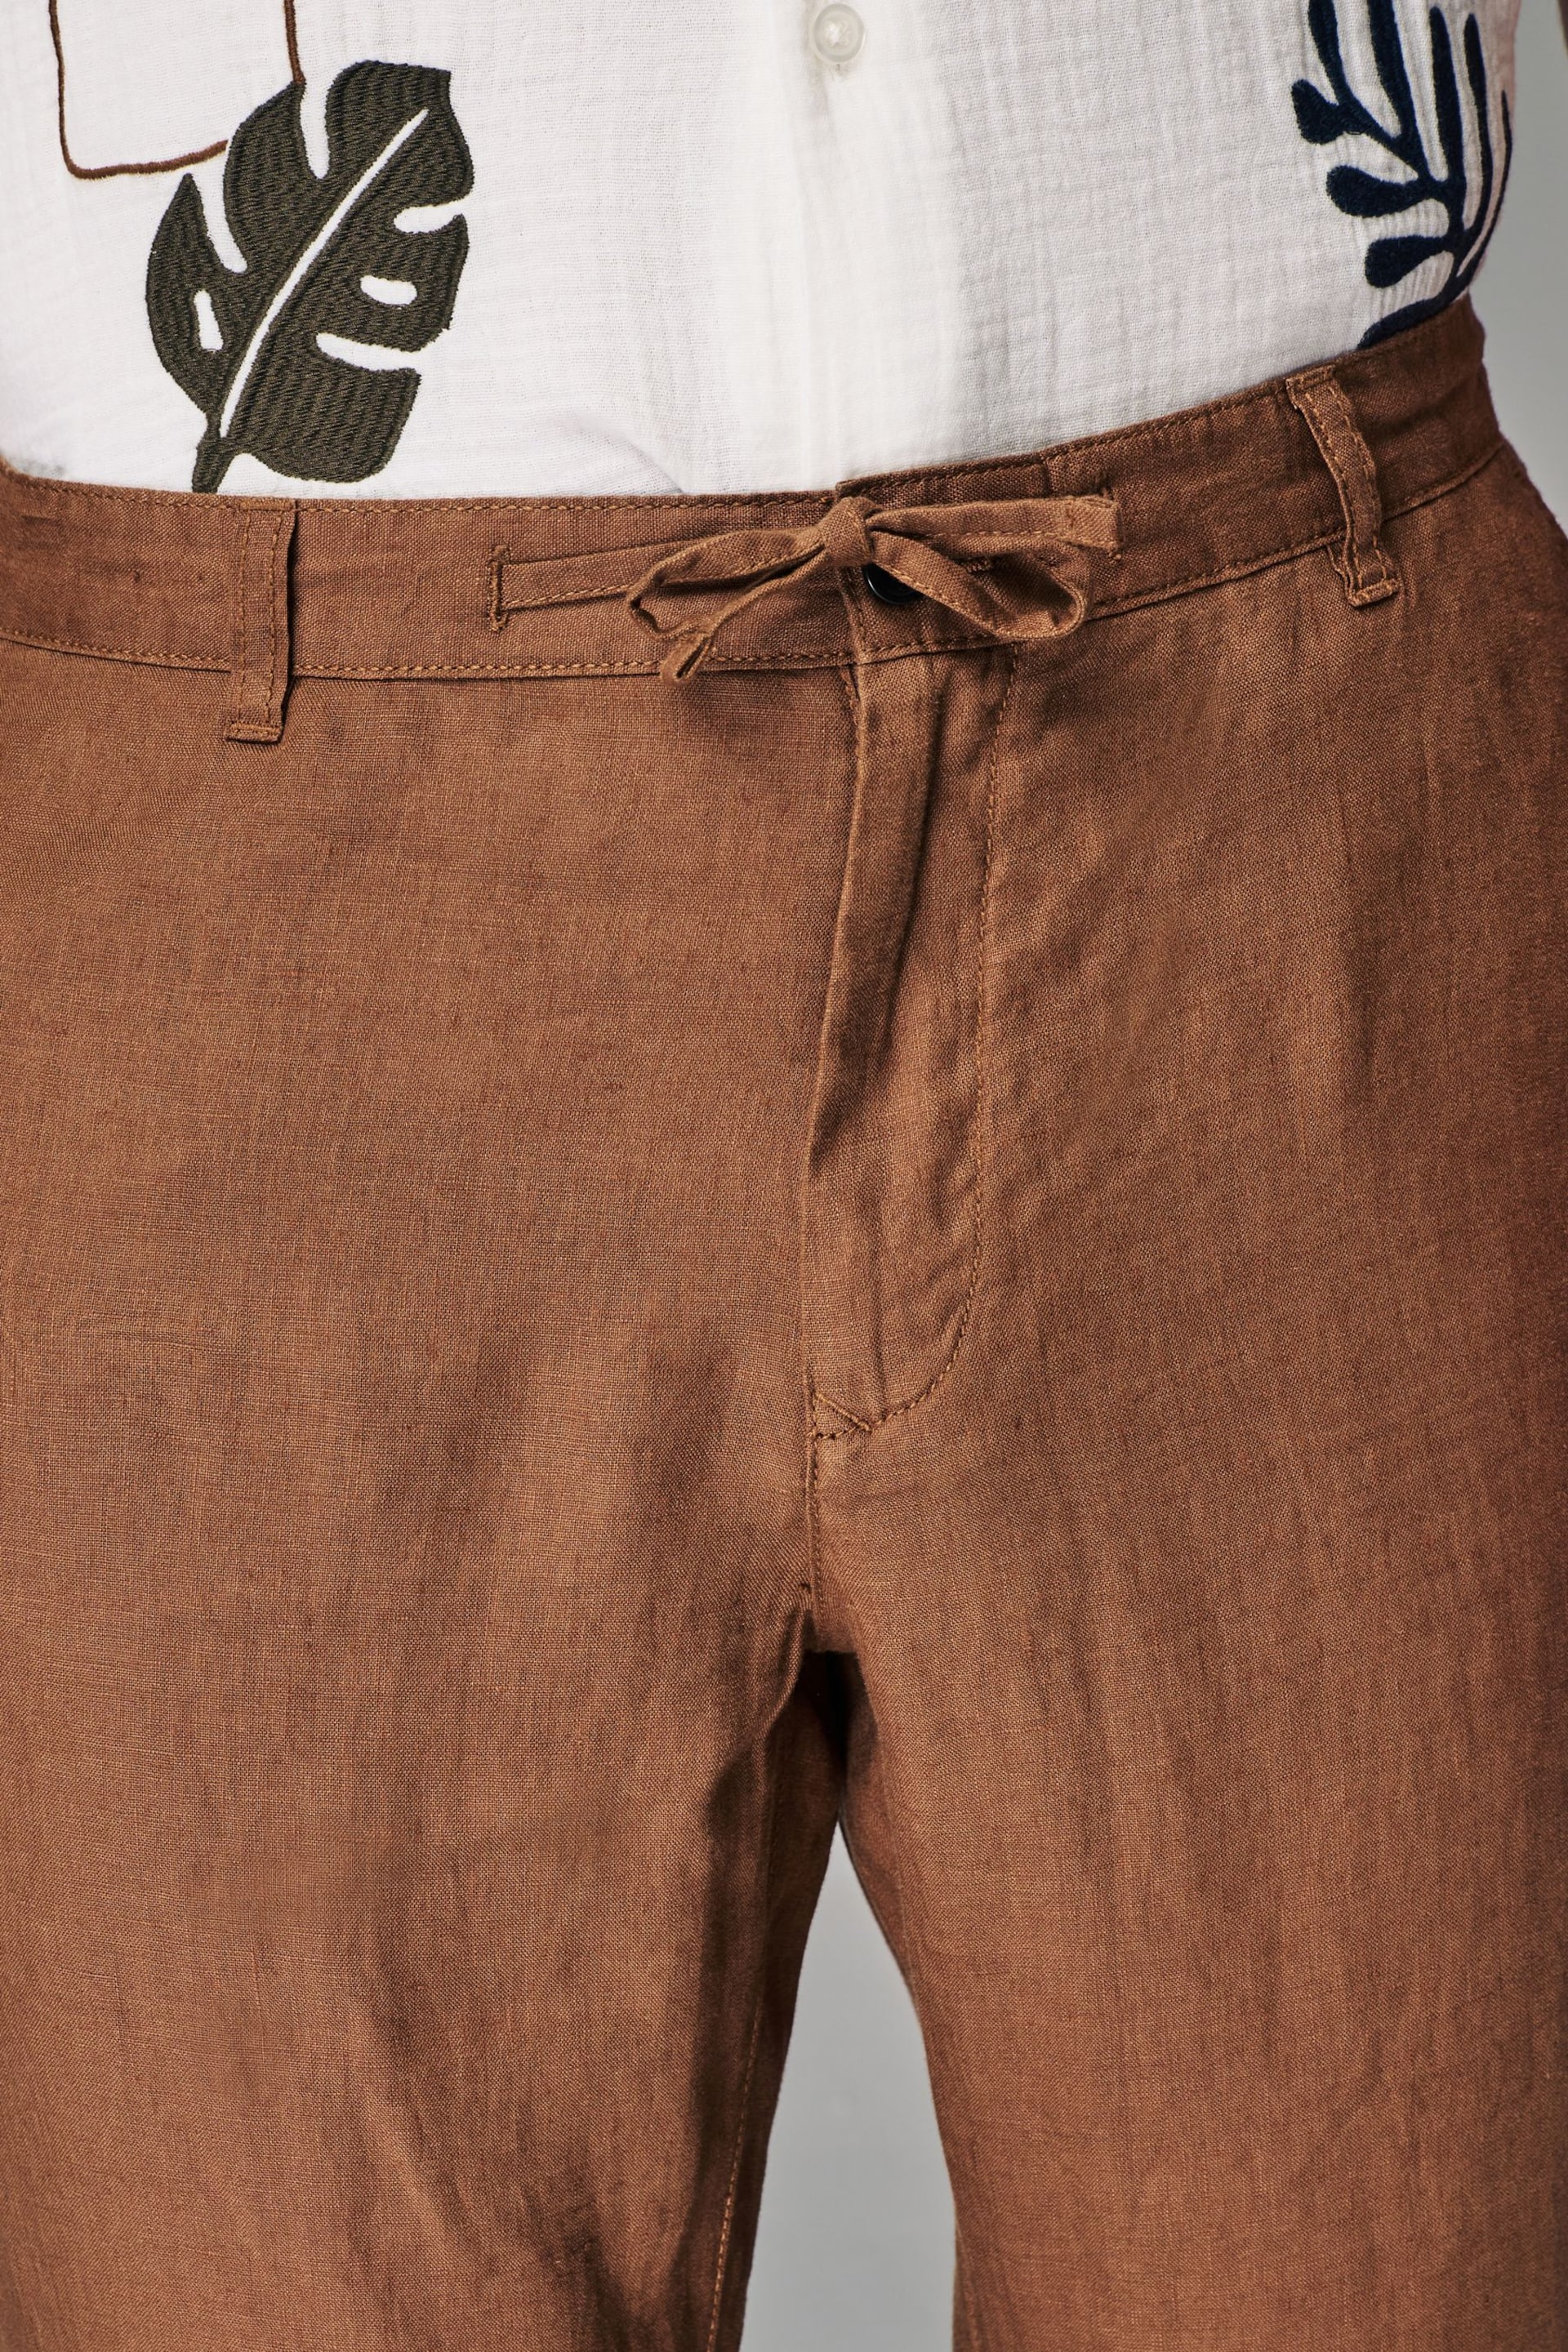 Rust Brown 100% Linen Drawstring Trousers - Image 6 of 10